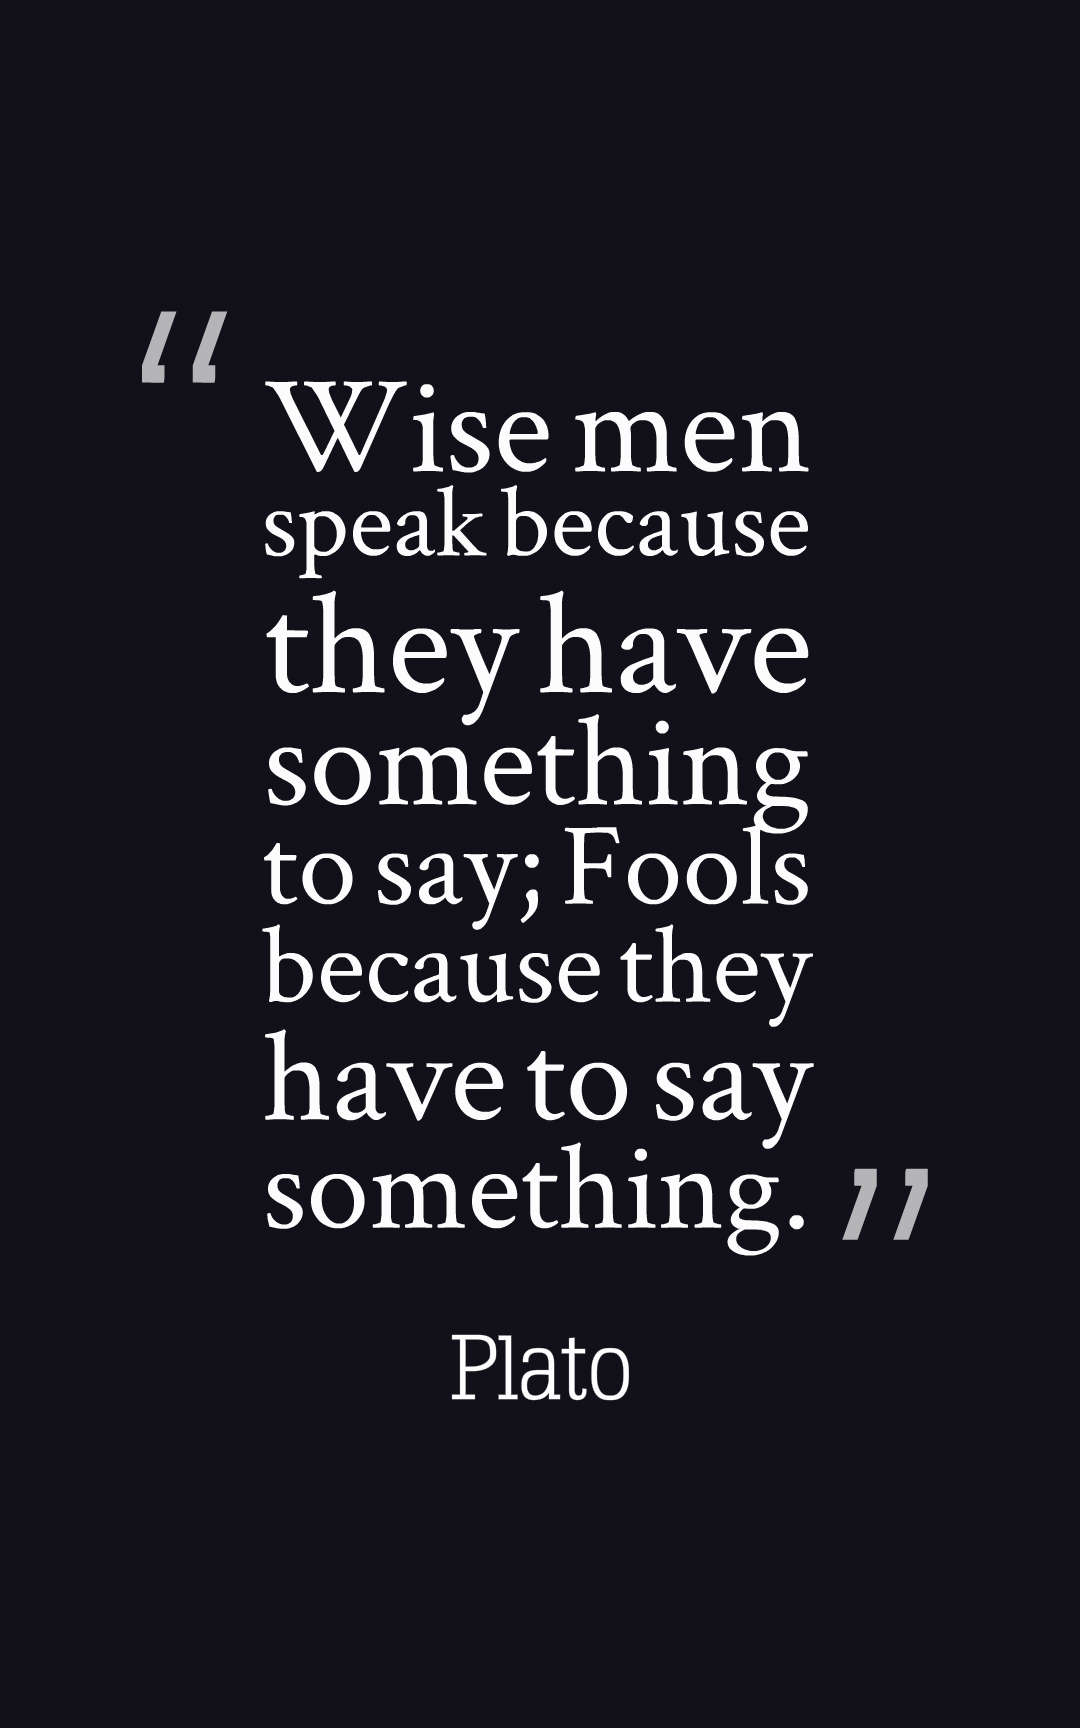 Wise men speak because they have something to say; Fools because they have to say somehting – Plato